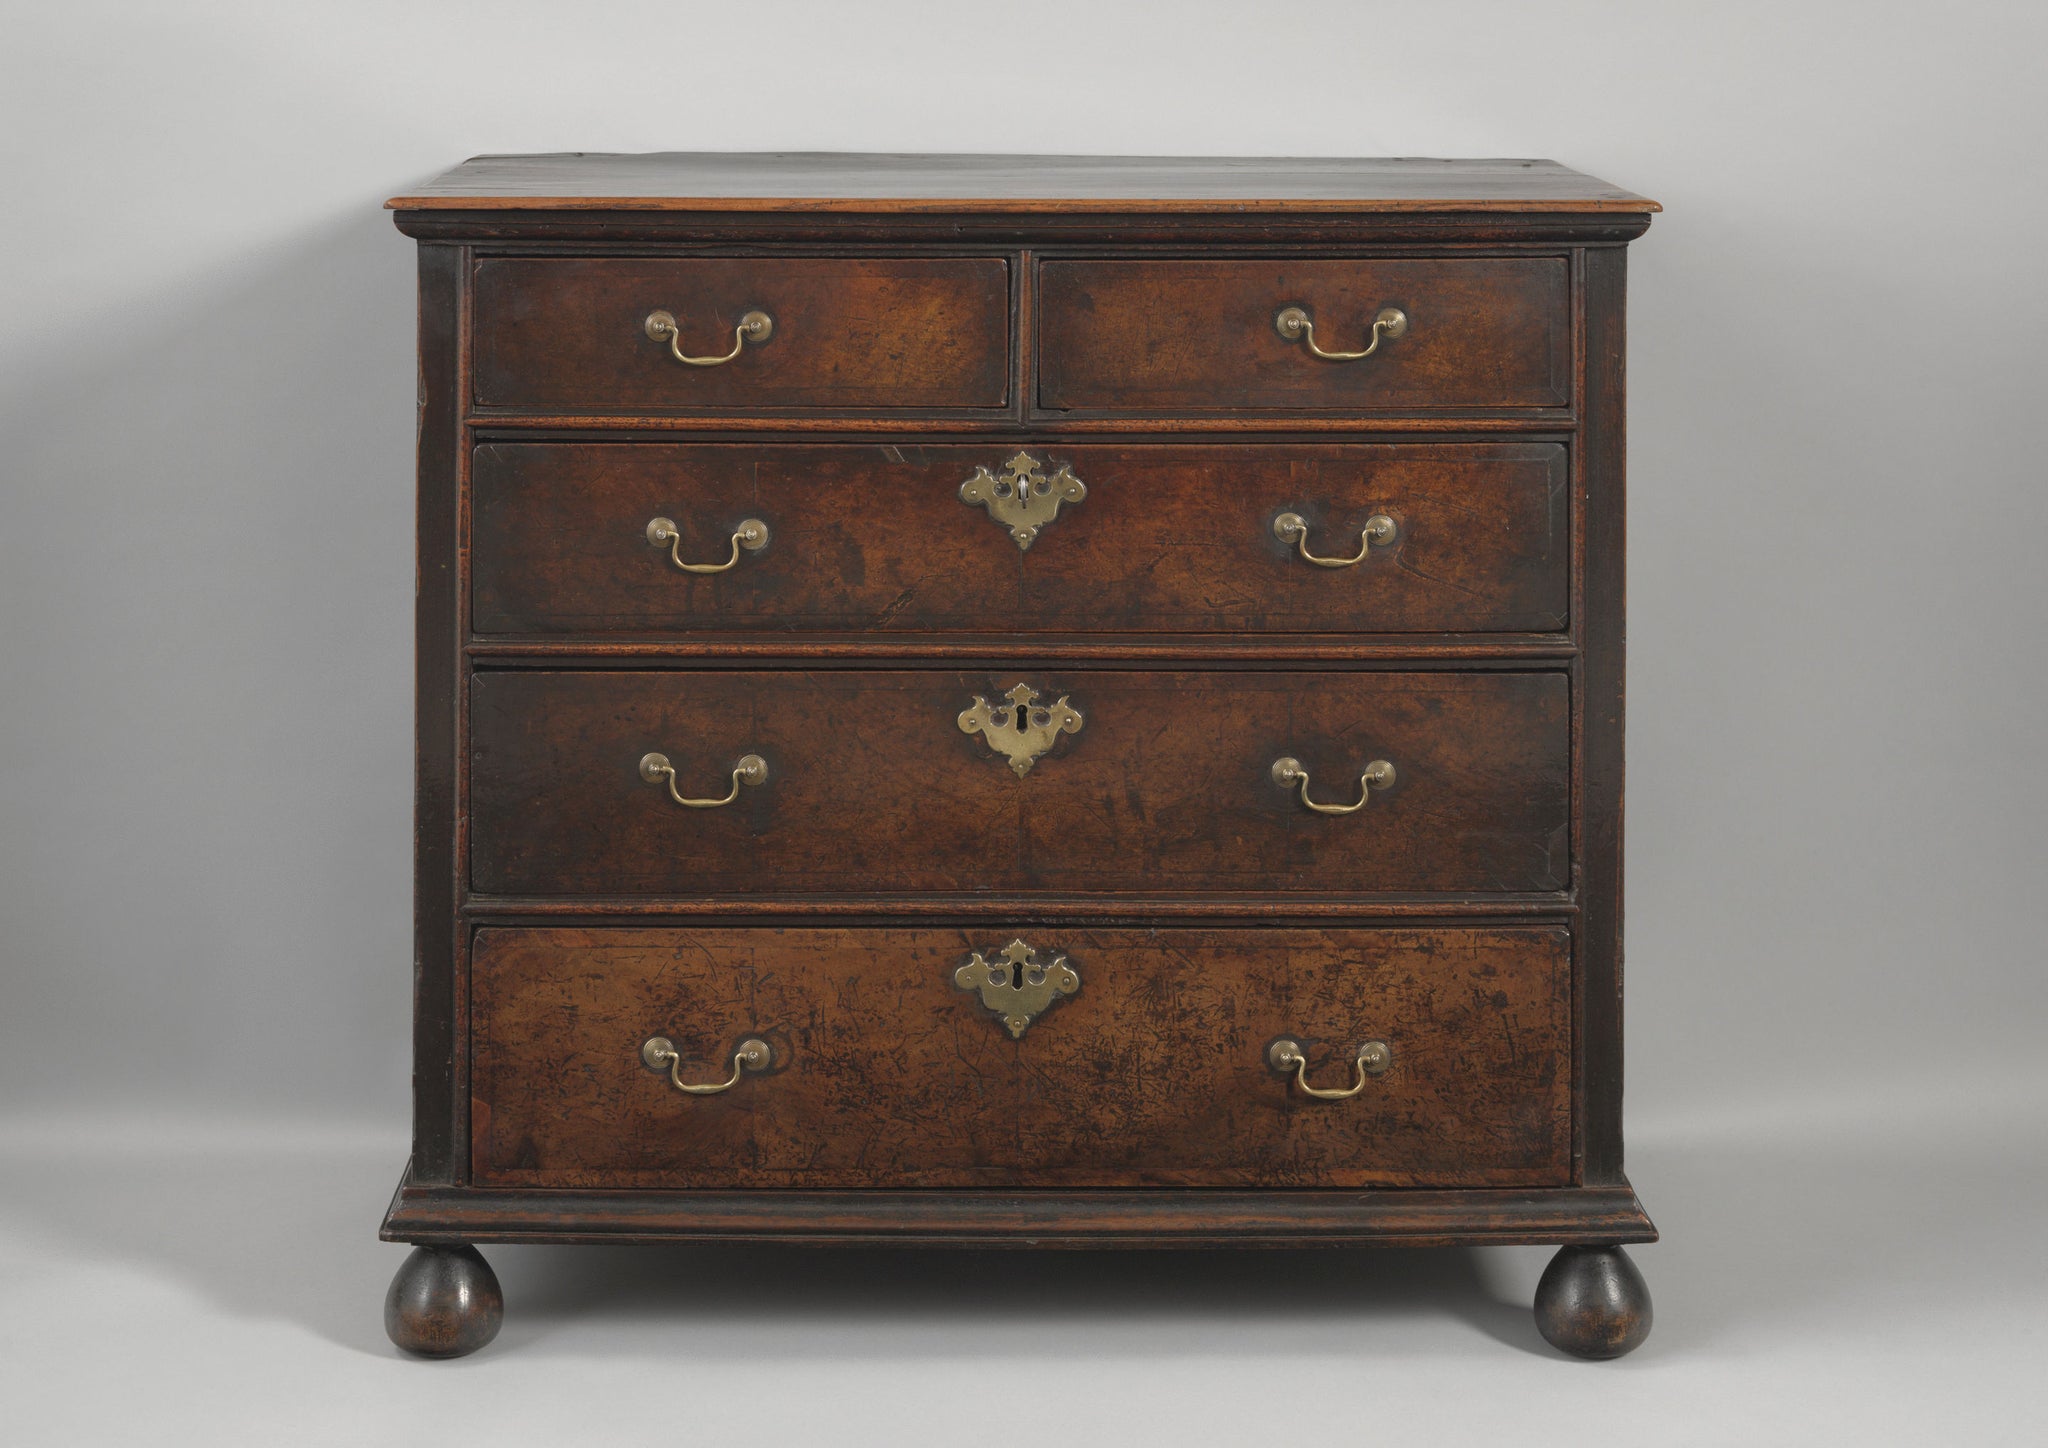 Unusual and Delightful Small Early Provincial Chest of Drawers